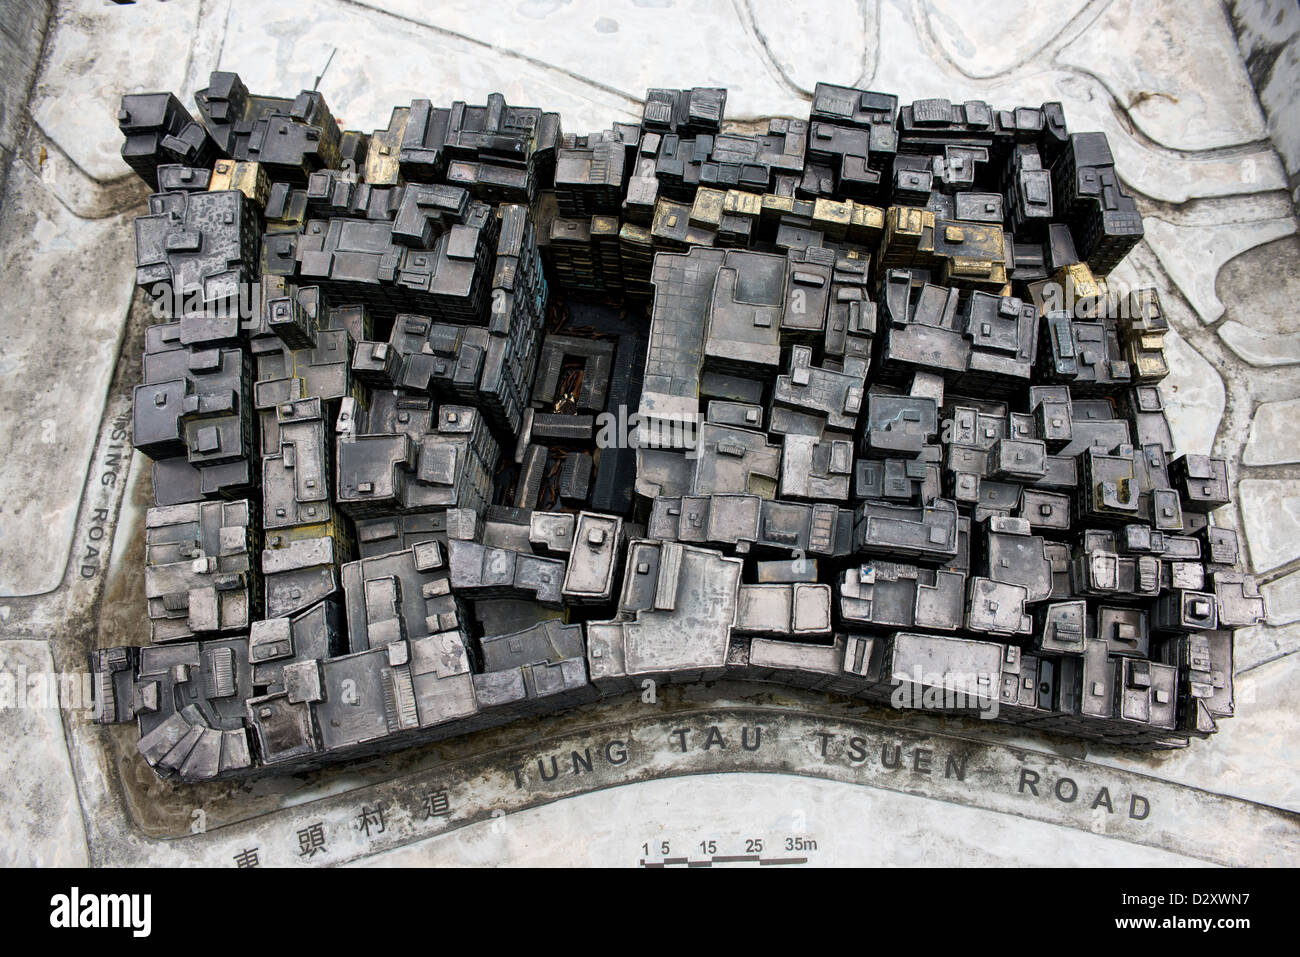 A scale model of the old Kowloon Walled City before it was demolised in 1994, Hong Kong. Stock Photo